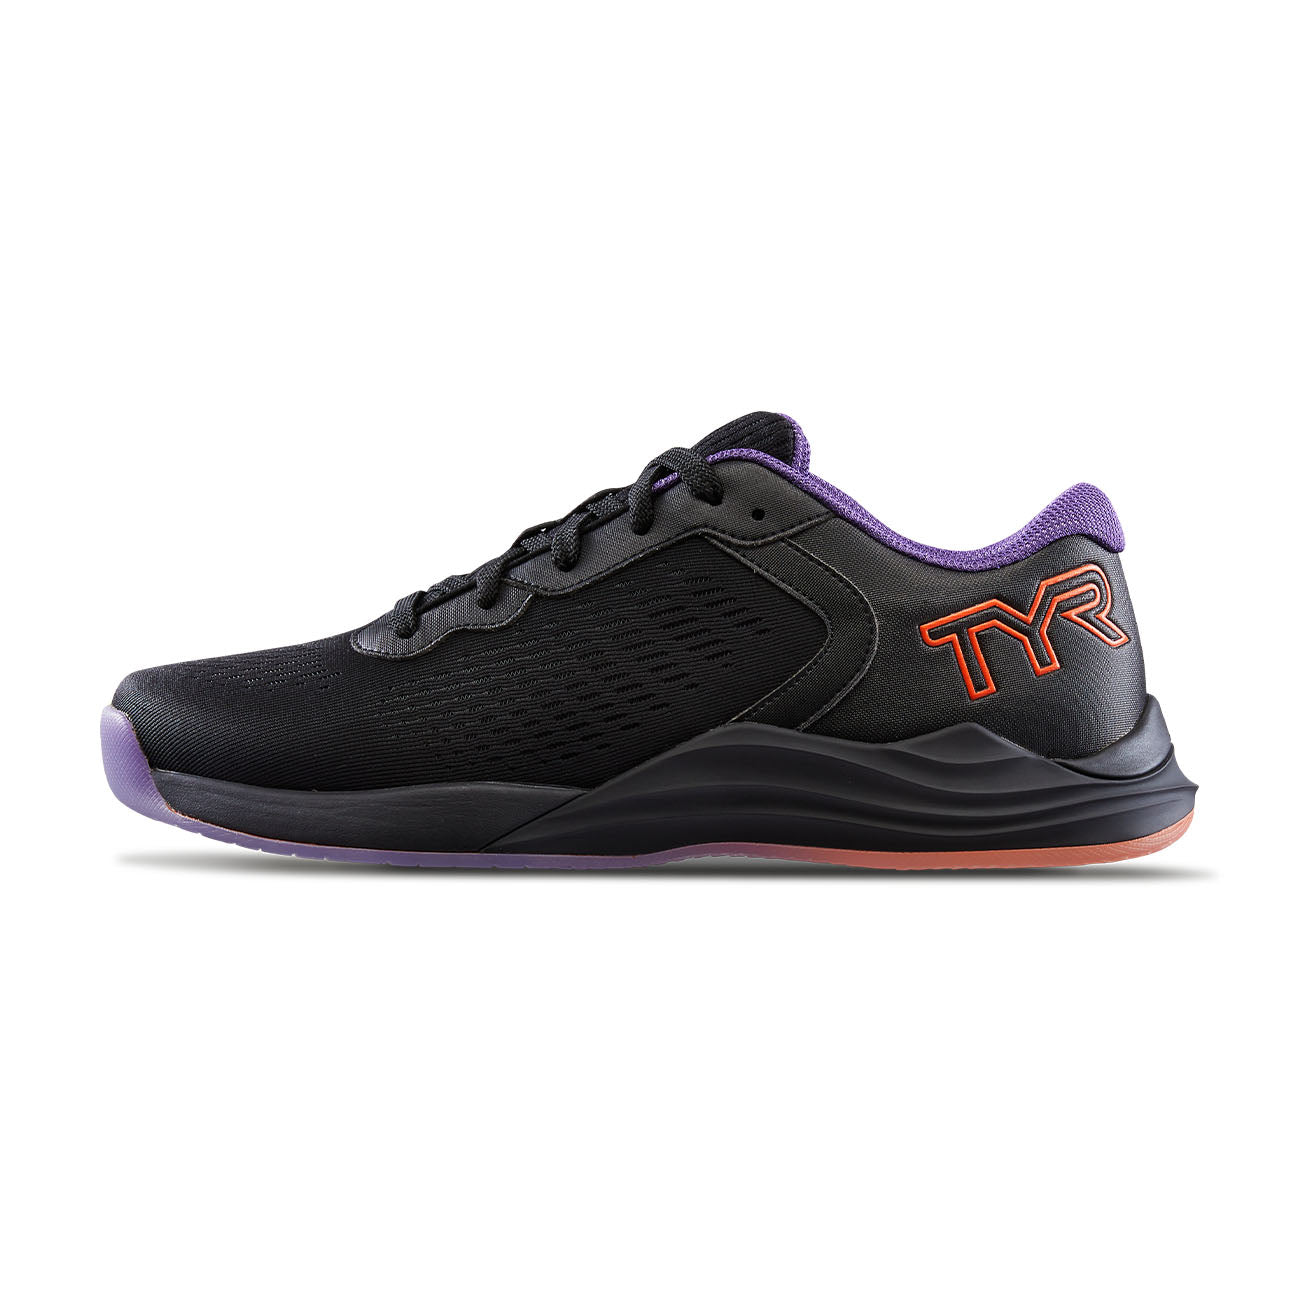 TYR CXT-1 Trainer in black, purple, and orange colors